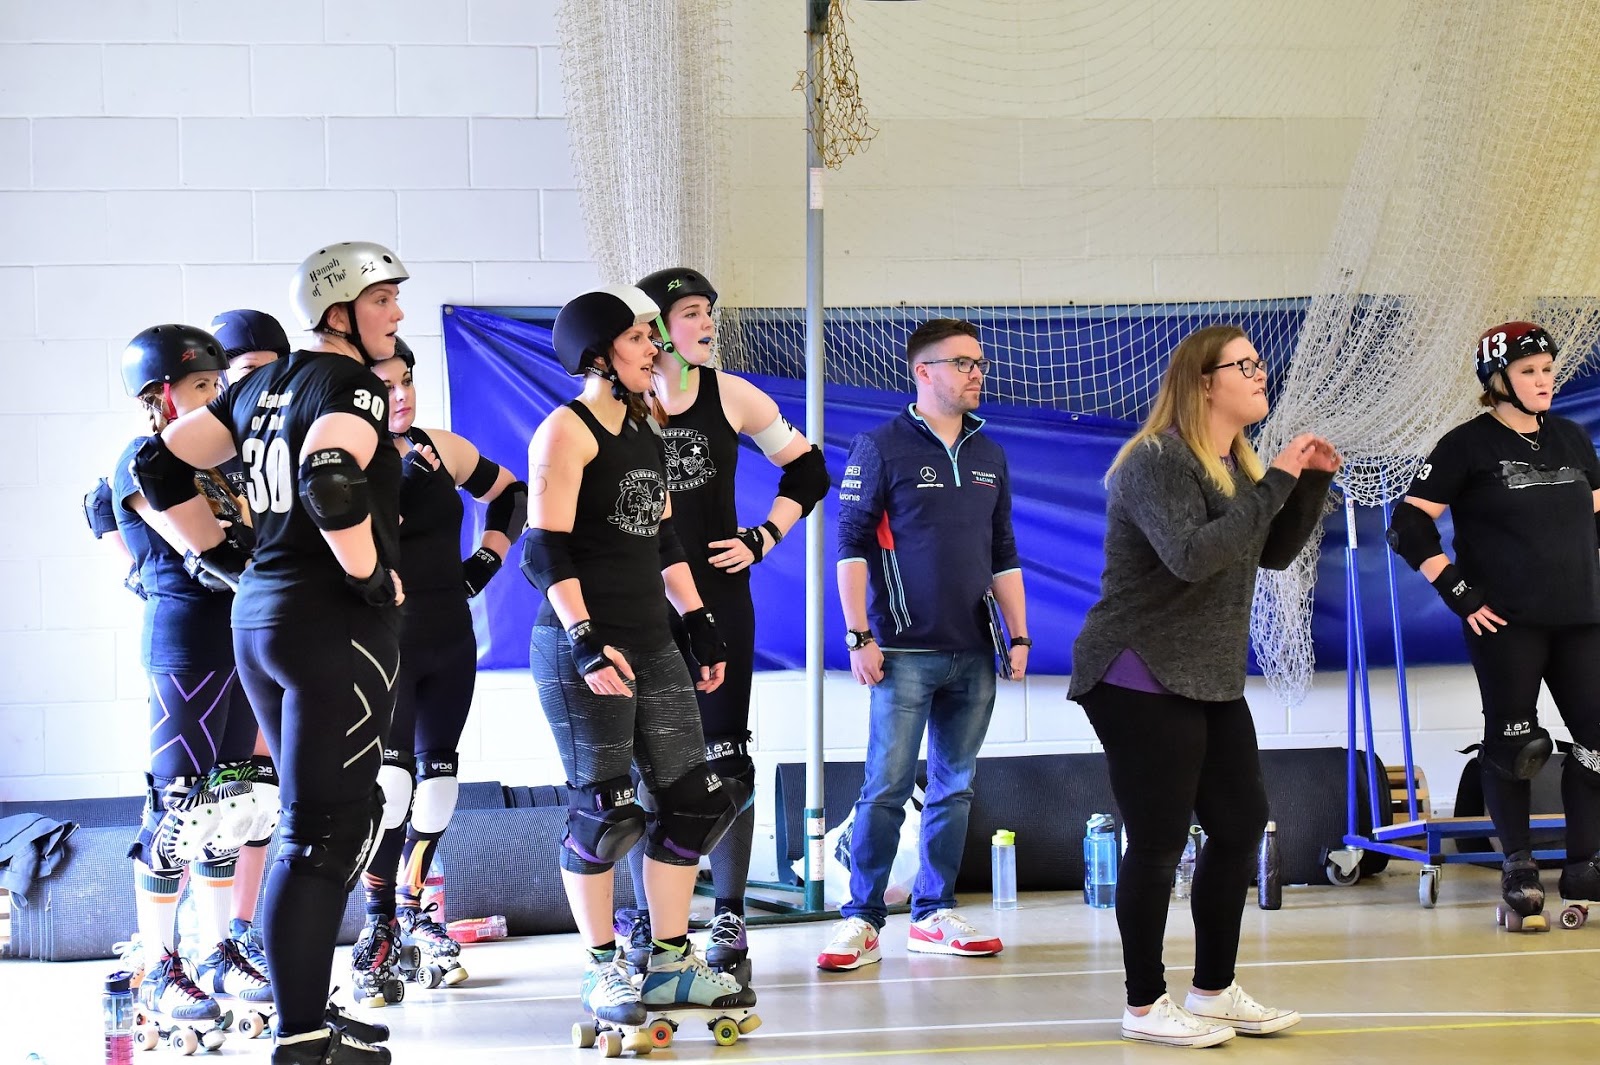 How to survive a roller derby injury